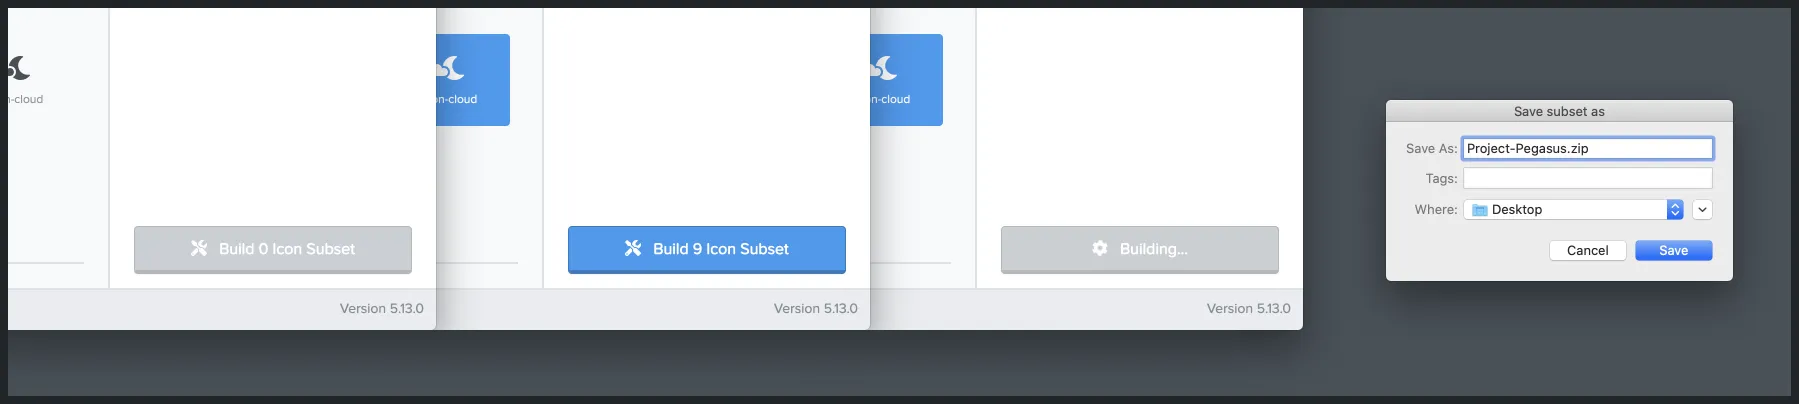 Once the icons are selected, the subset is ready to build and save.